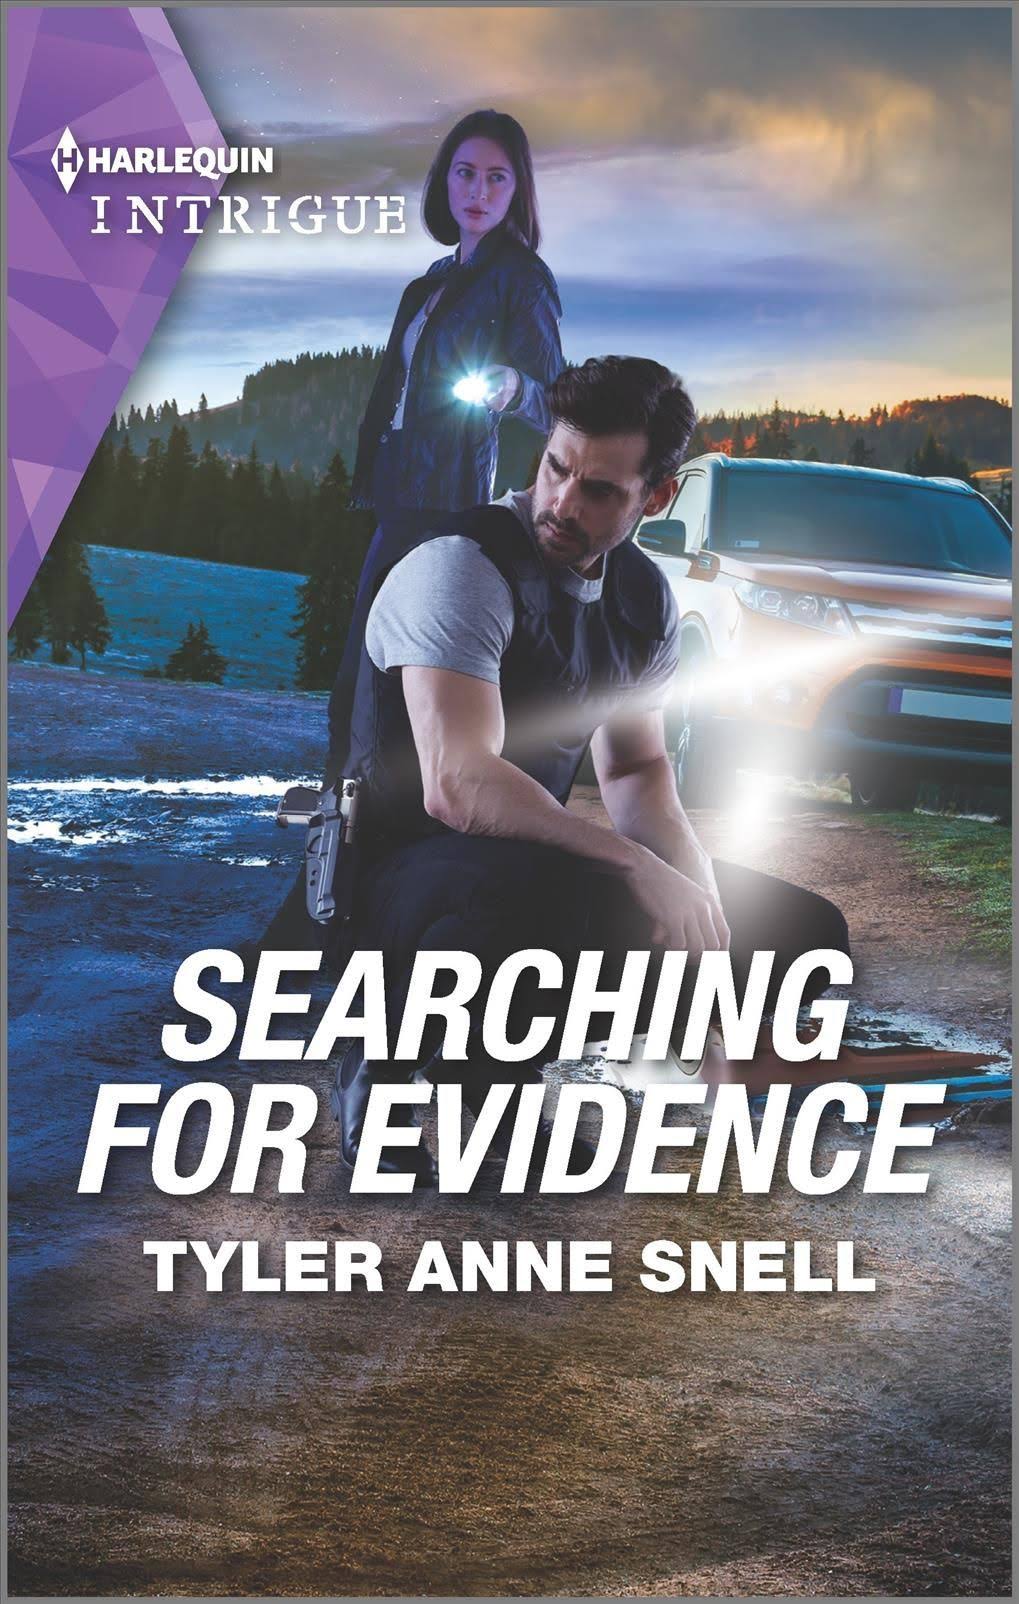 Searching for Evidence by Tyler Anne Snell